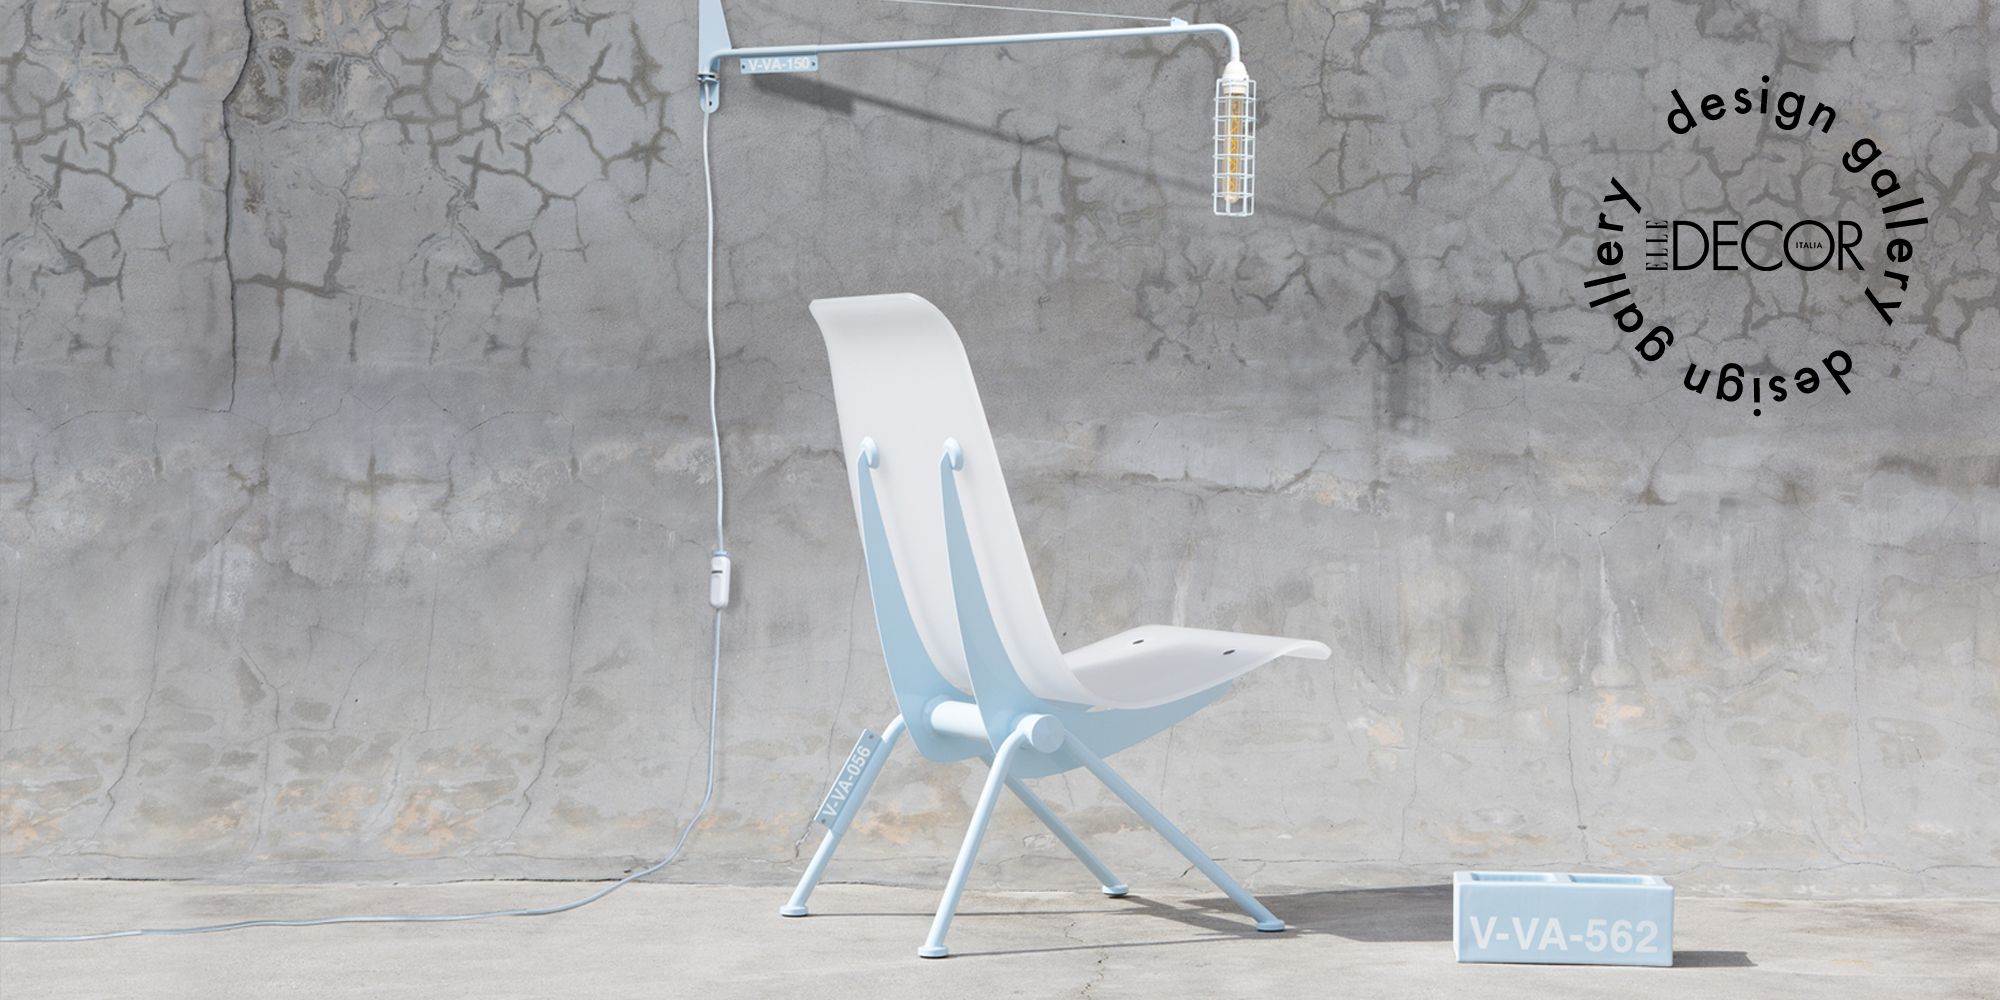 Antony Chair by Virgil Abloh For Sale at 1stDibs  virgil abloh vitra chair,  prouve antony chair, virgil abloh chair